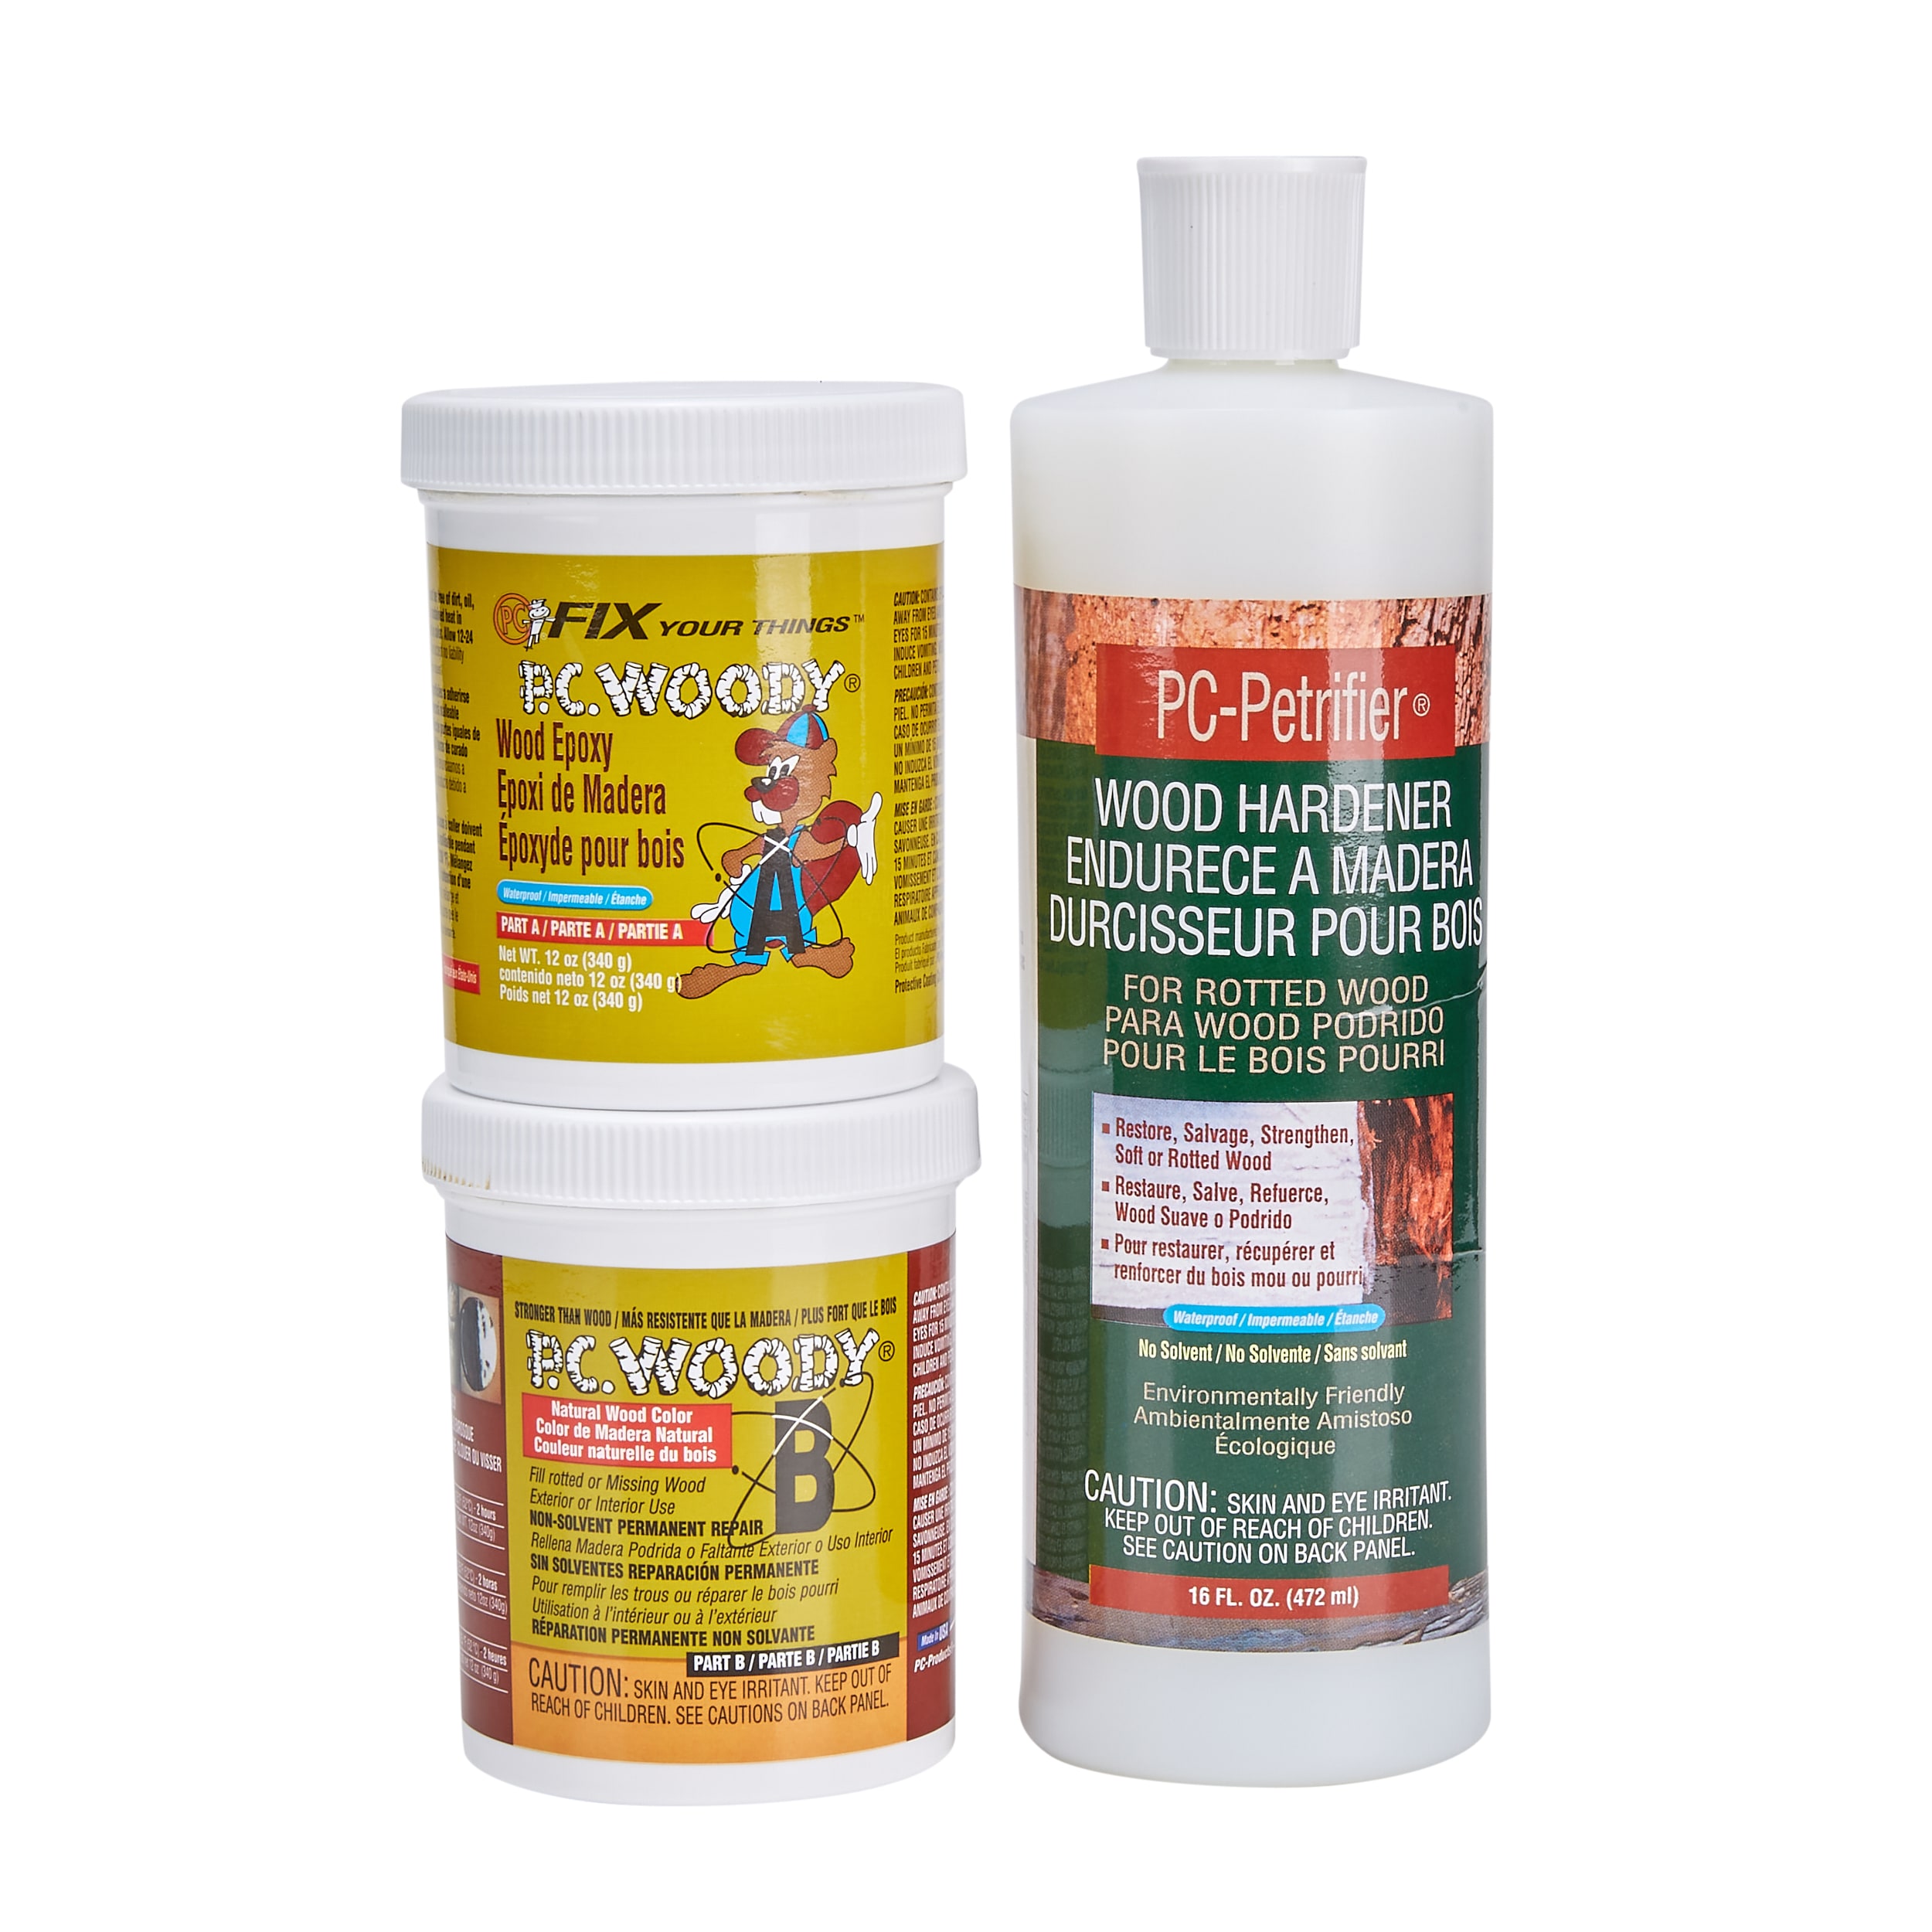 PC-Woody PC-WOODY 6OZ Wood Filler Epoxy Adhesive, 6 oz, Can, White